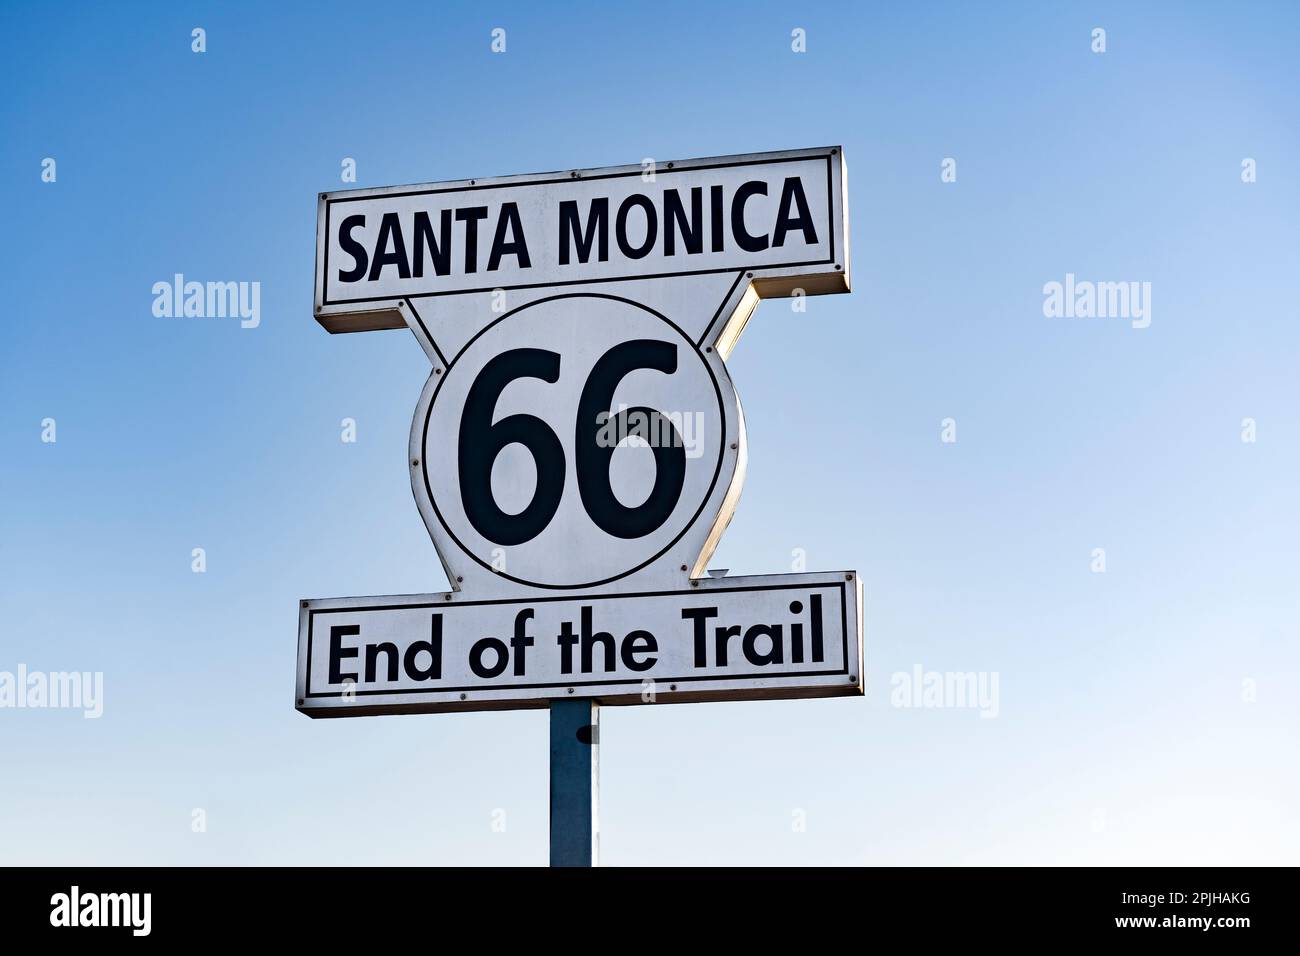 Route 66 end of the train. Santa Monica road sign Stock Photo